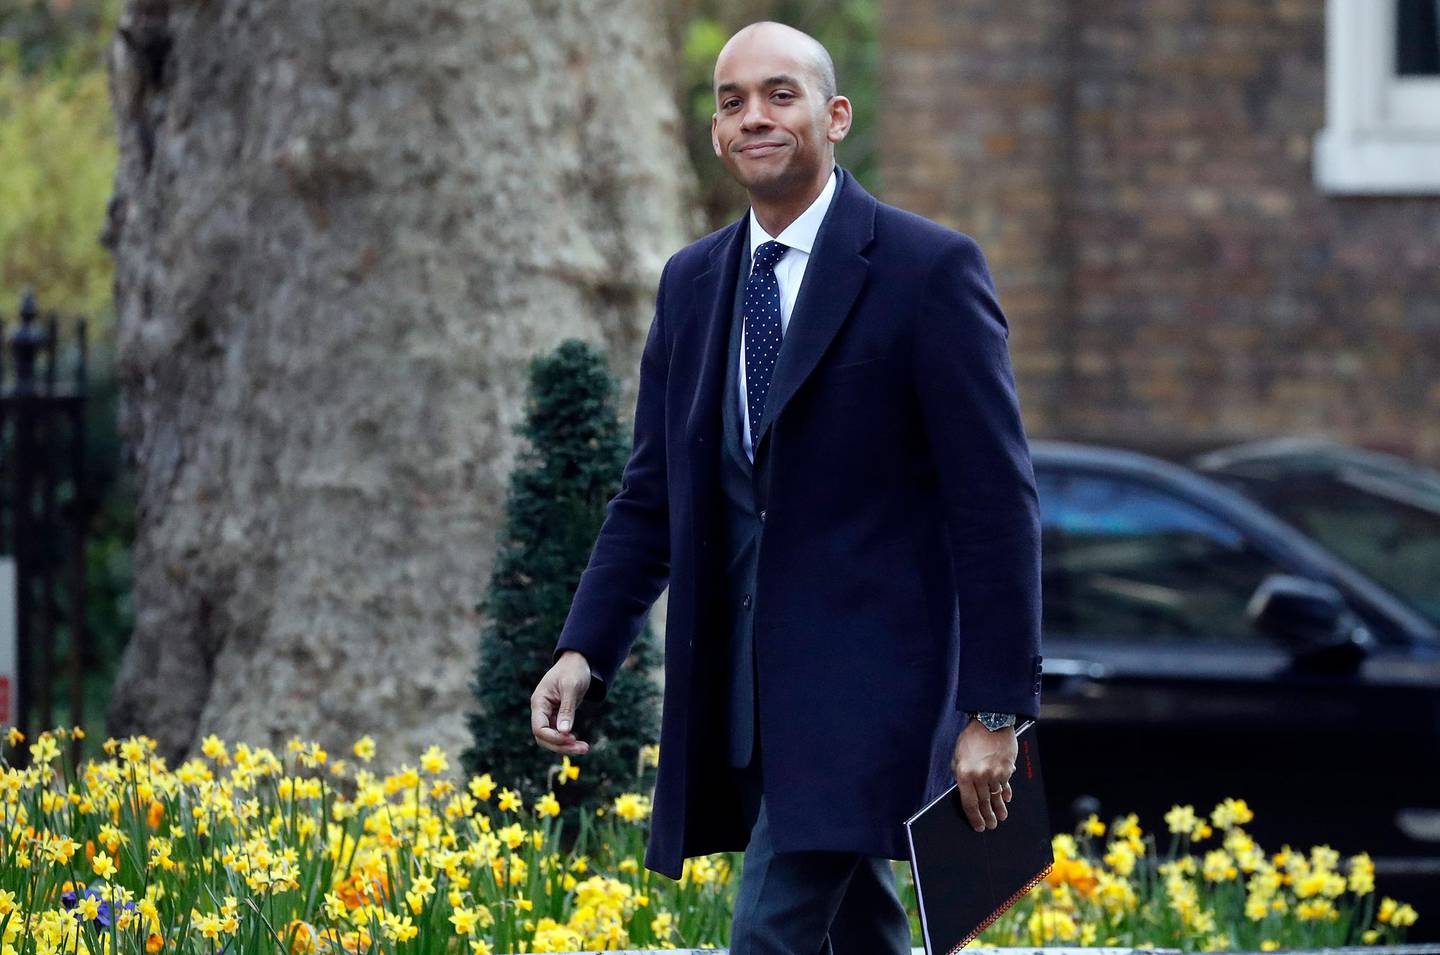 FILE - In this file photo dated Monday, April 1, 2019, Britain's lawmaker Chuka Umunna arrives at 10 Downing Street for a knife crime summit in London.  Umunna quit the Labour Party earlier this year to help form a pro-European new political party, but has now moved to join the centrist Liberal Democrats, and is quoted Friday June 14, 2019, in The Times of London, saying the Lib Dems are best placed to stop Brexit.(AP Photo/Frank Augstein, FILE)